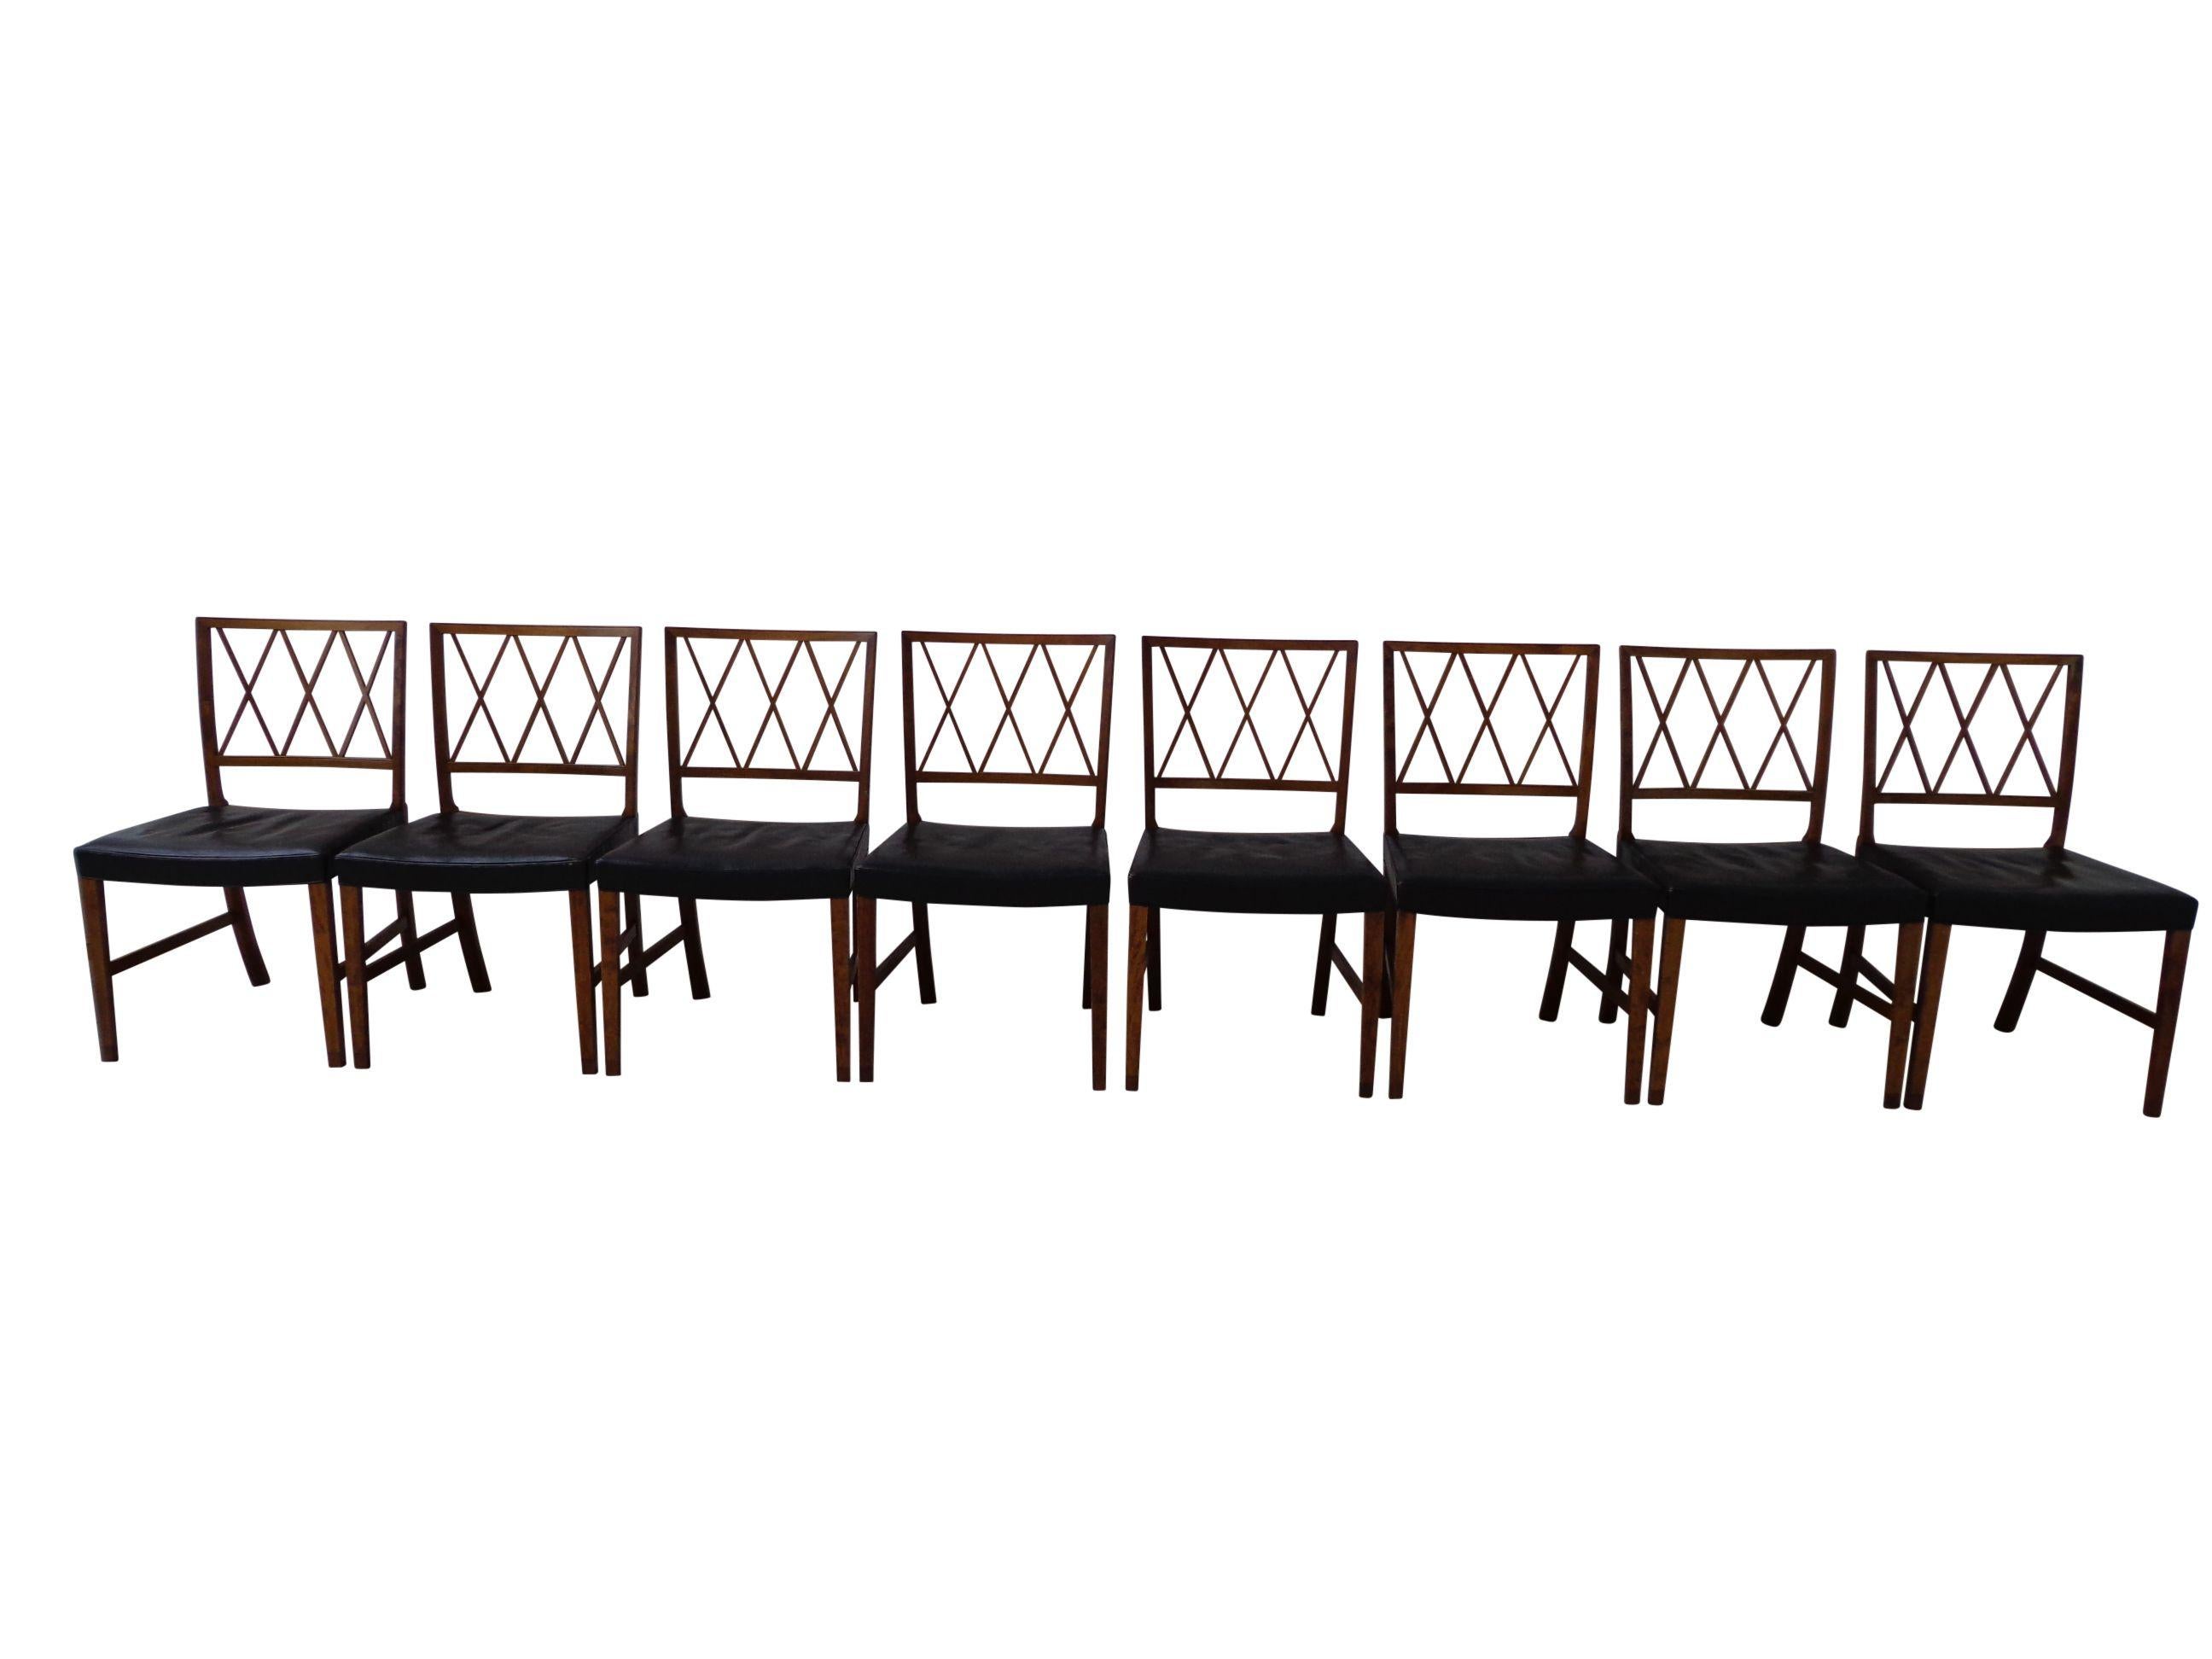 Ole Wanscher Dining Chairs by Cabinetmaker A.J Iversen in Denmark 1940s For Sale 1